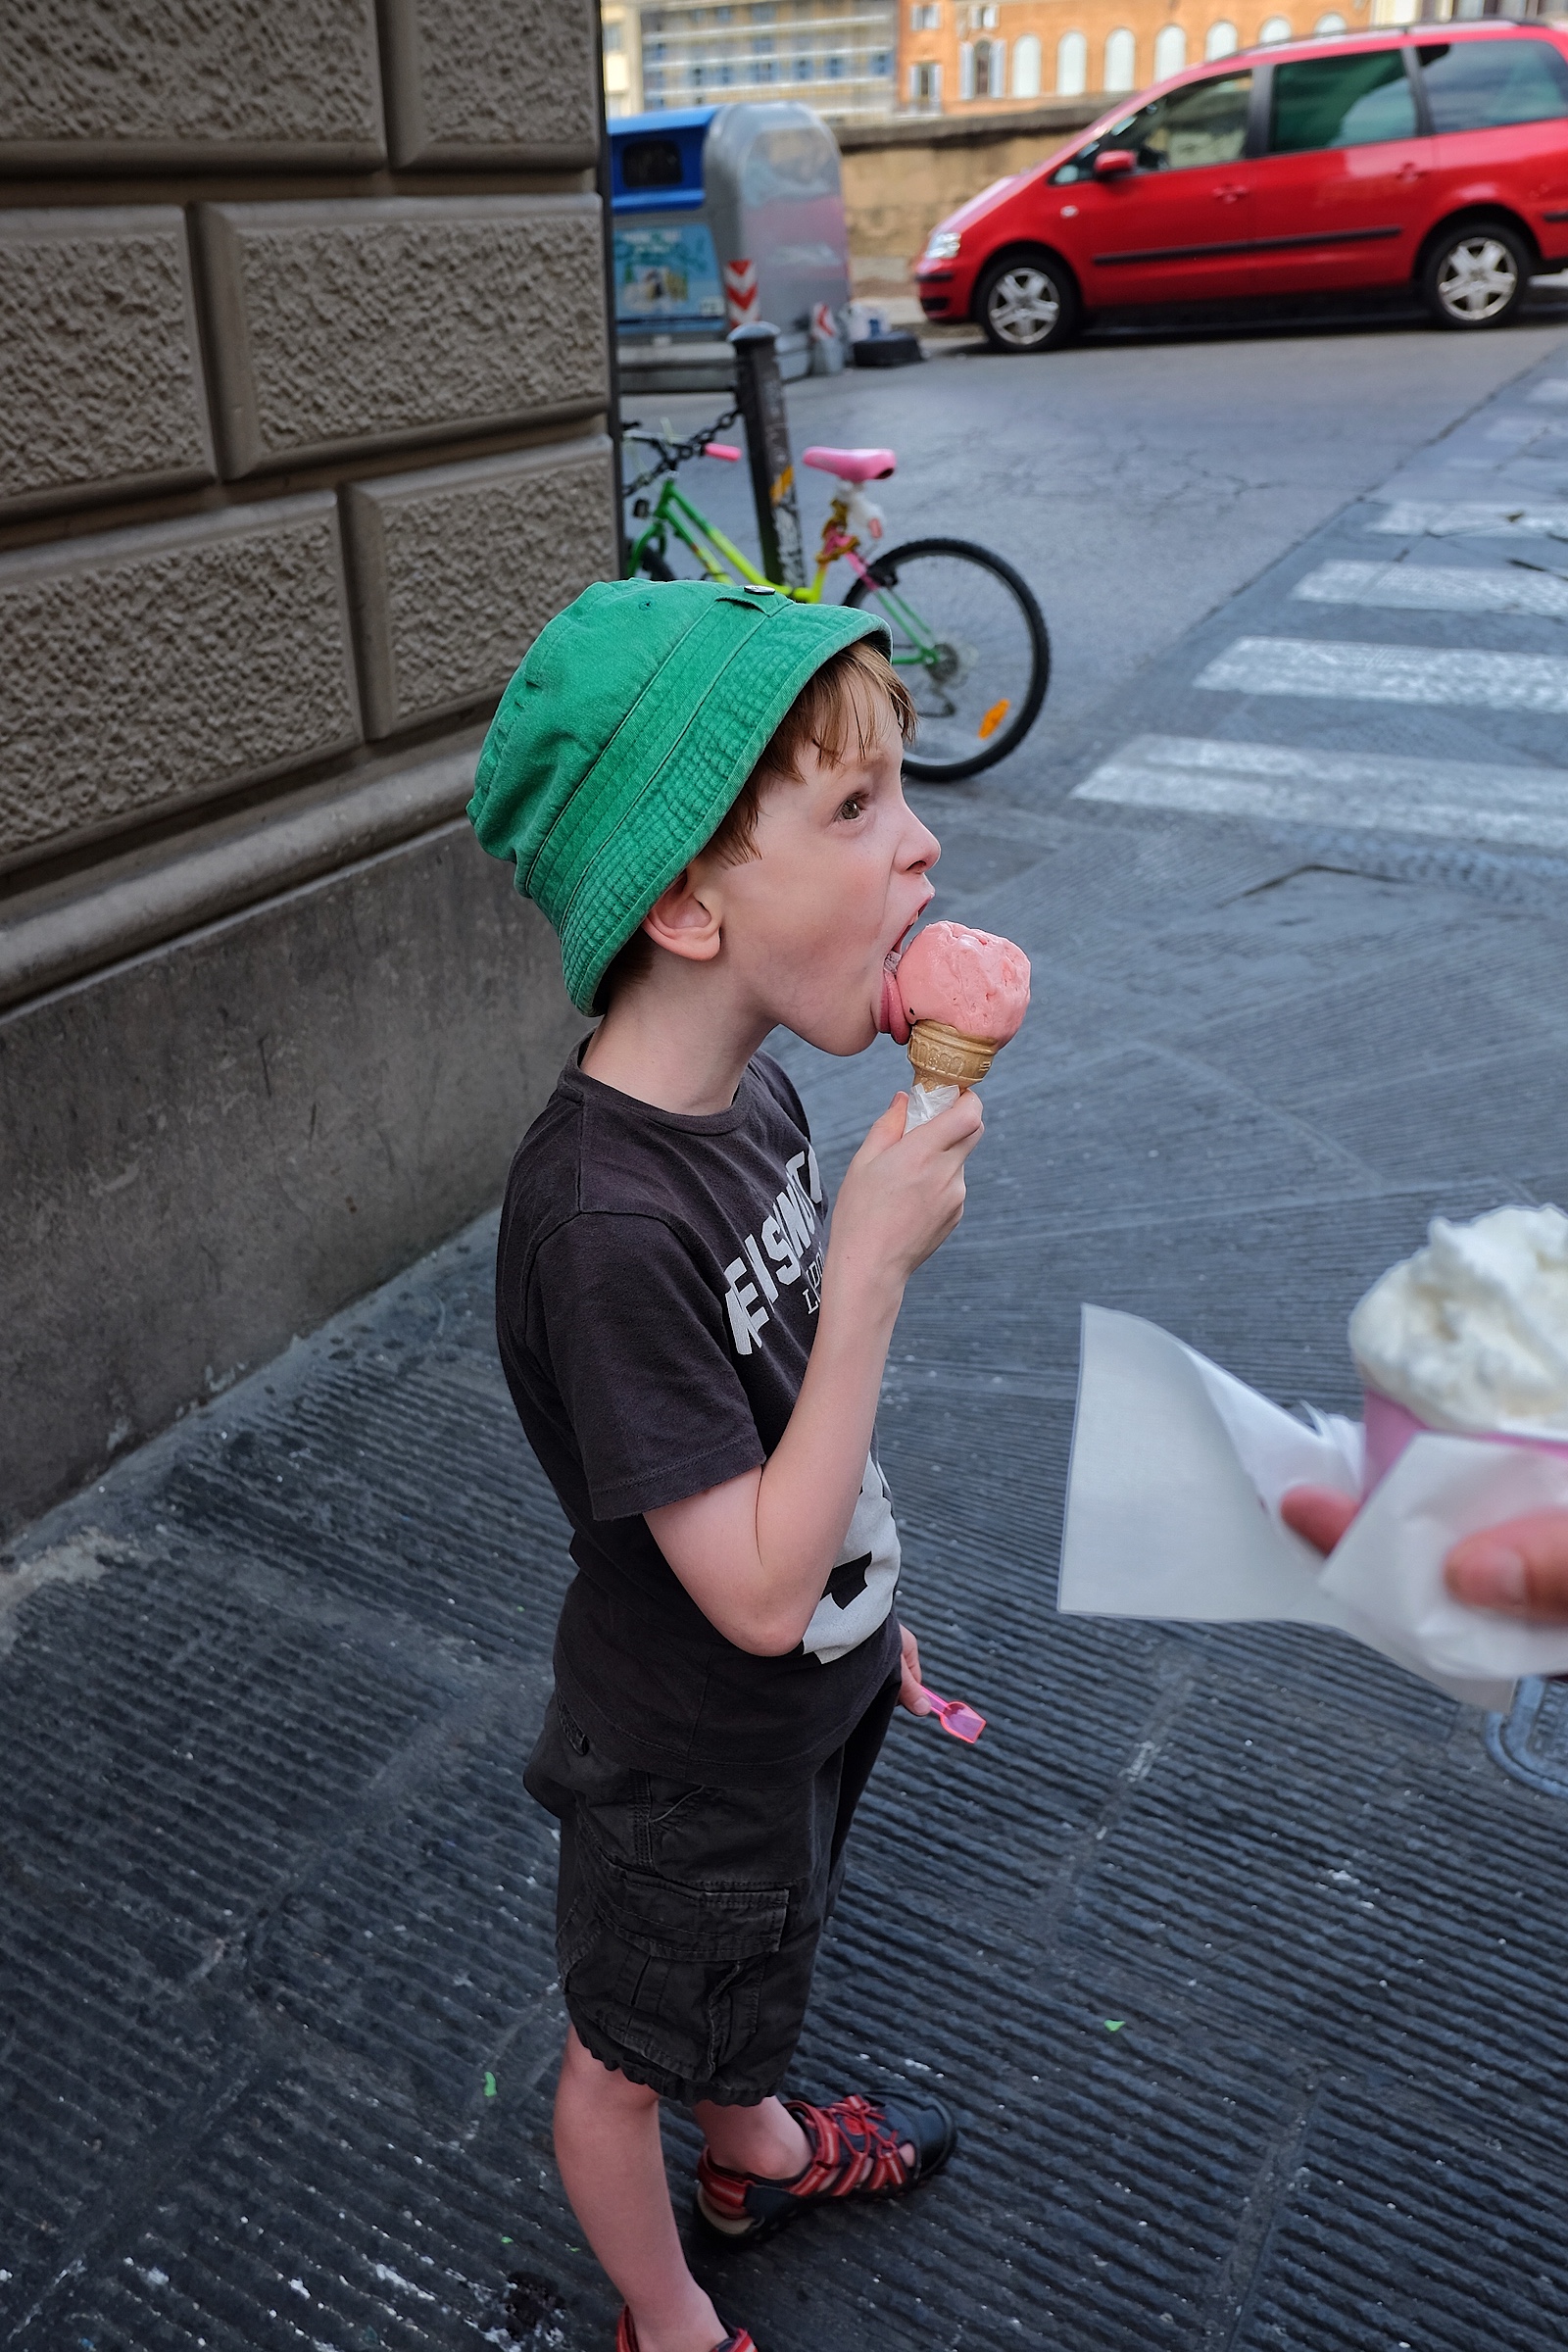 Not even an hour in Florence and Rowan is enjoying his first gelato.